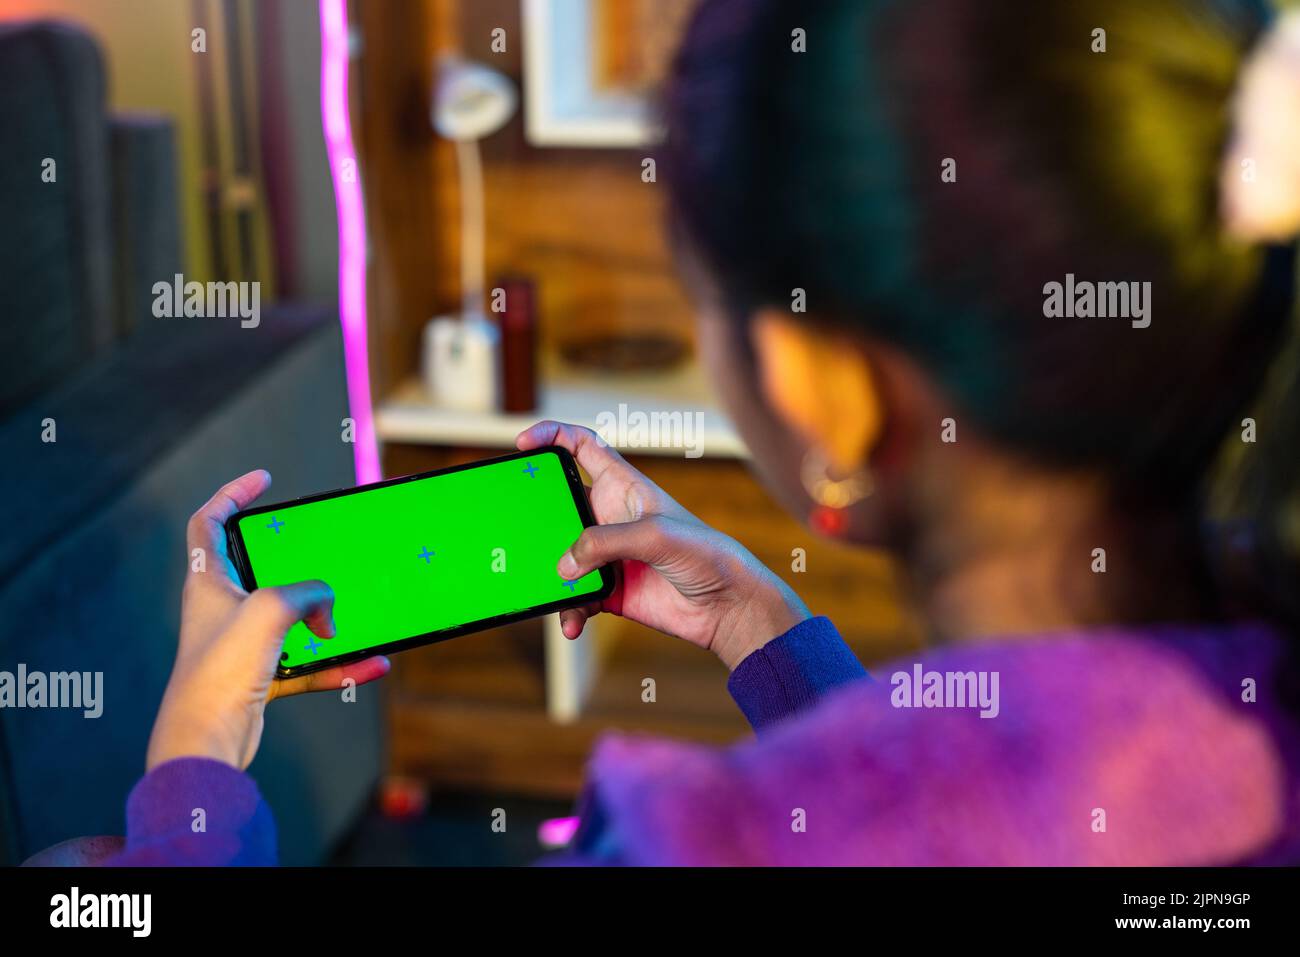 Shoulder shot of teenager girl playing video game on green screen mobile phone at home - concept of enteraiment, gaming addiction and technology Stock Photo